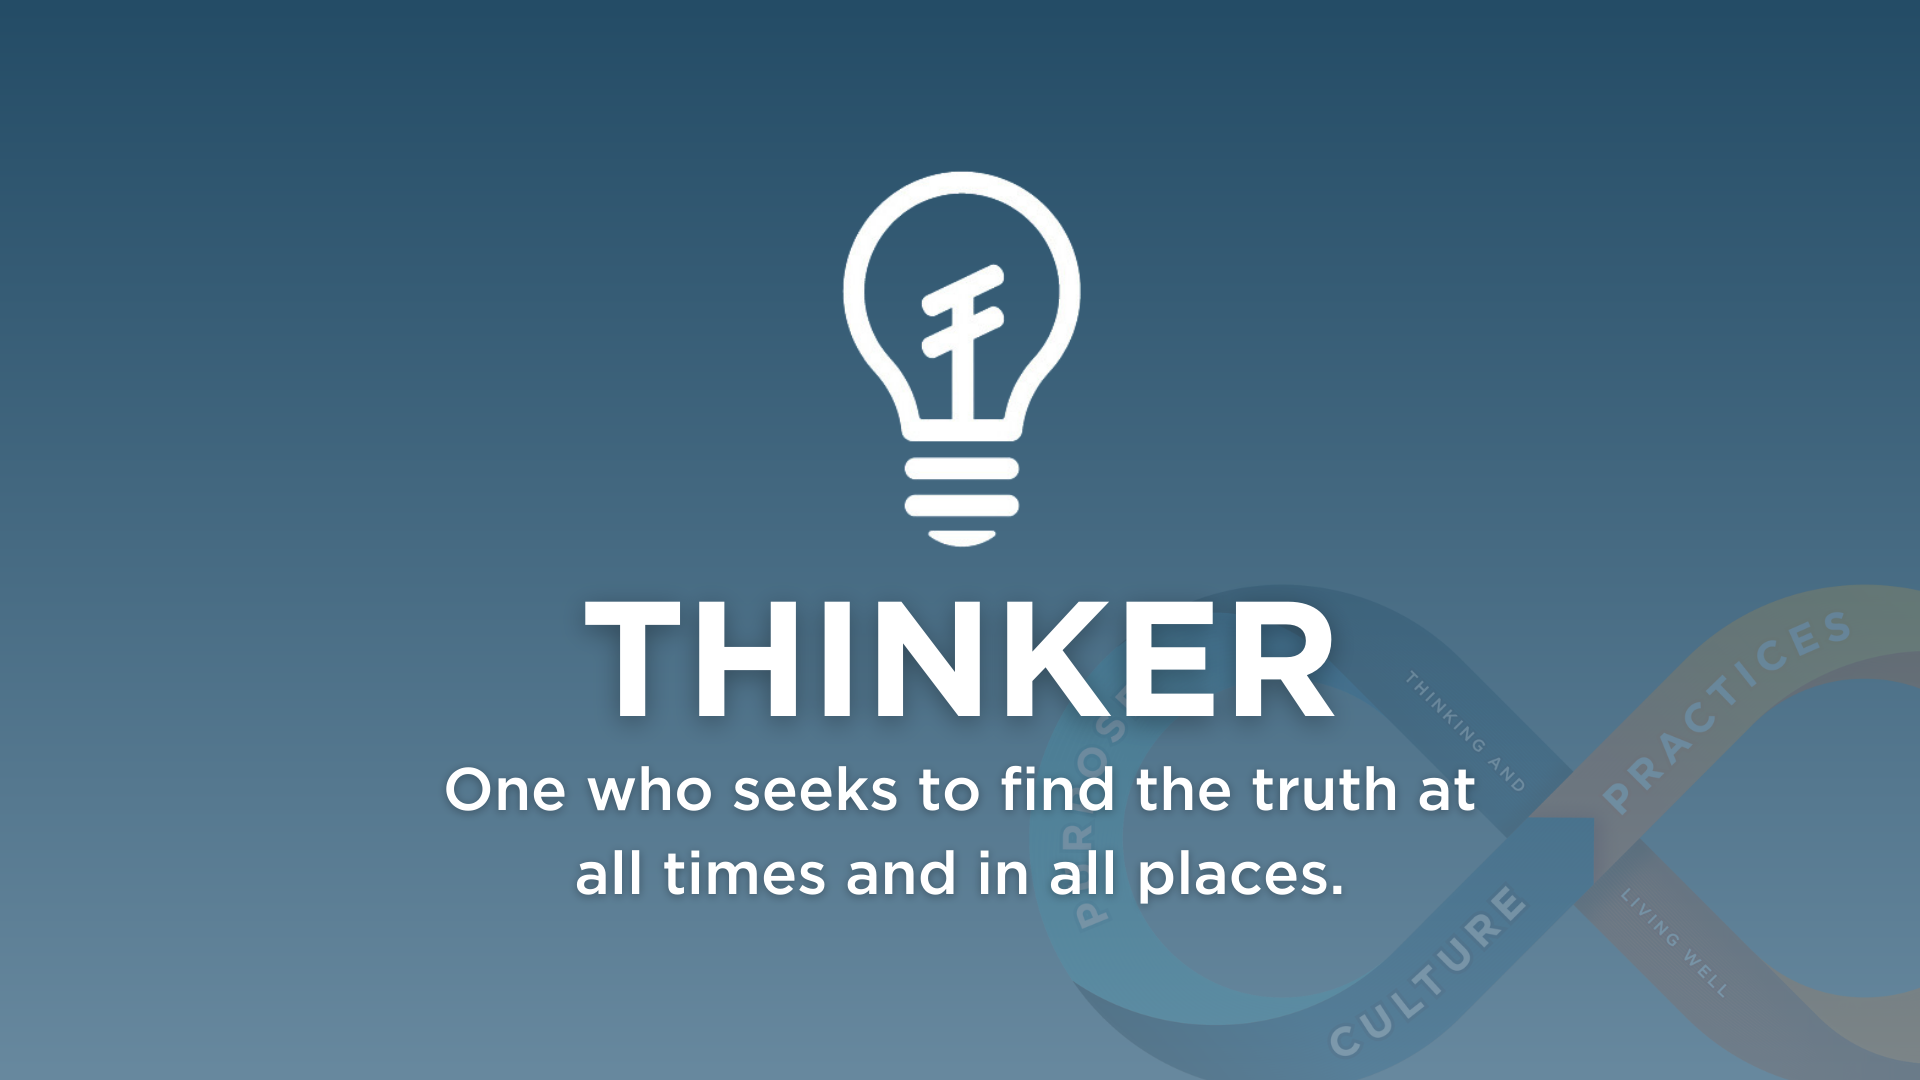 graphic for Thinker - One who seeks to find the truth at all times and in all places.